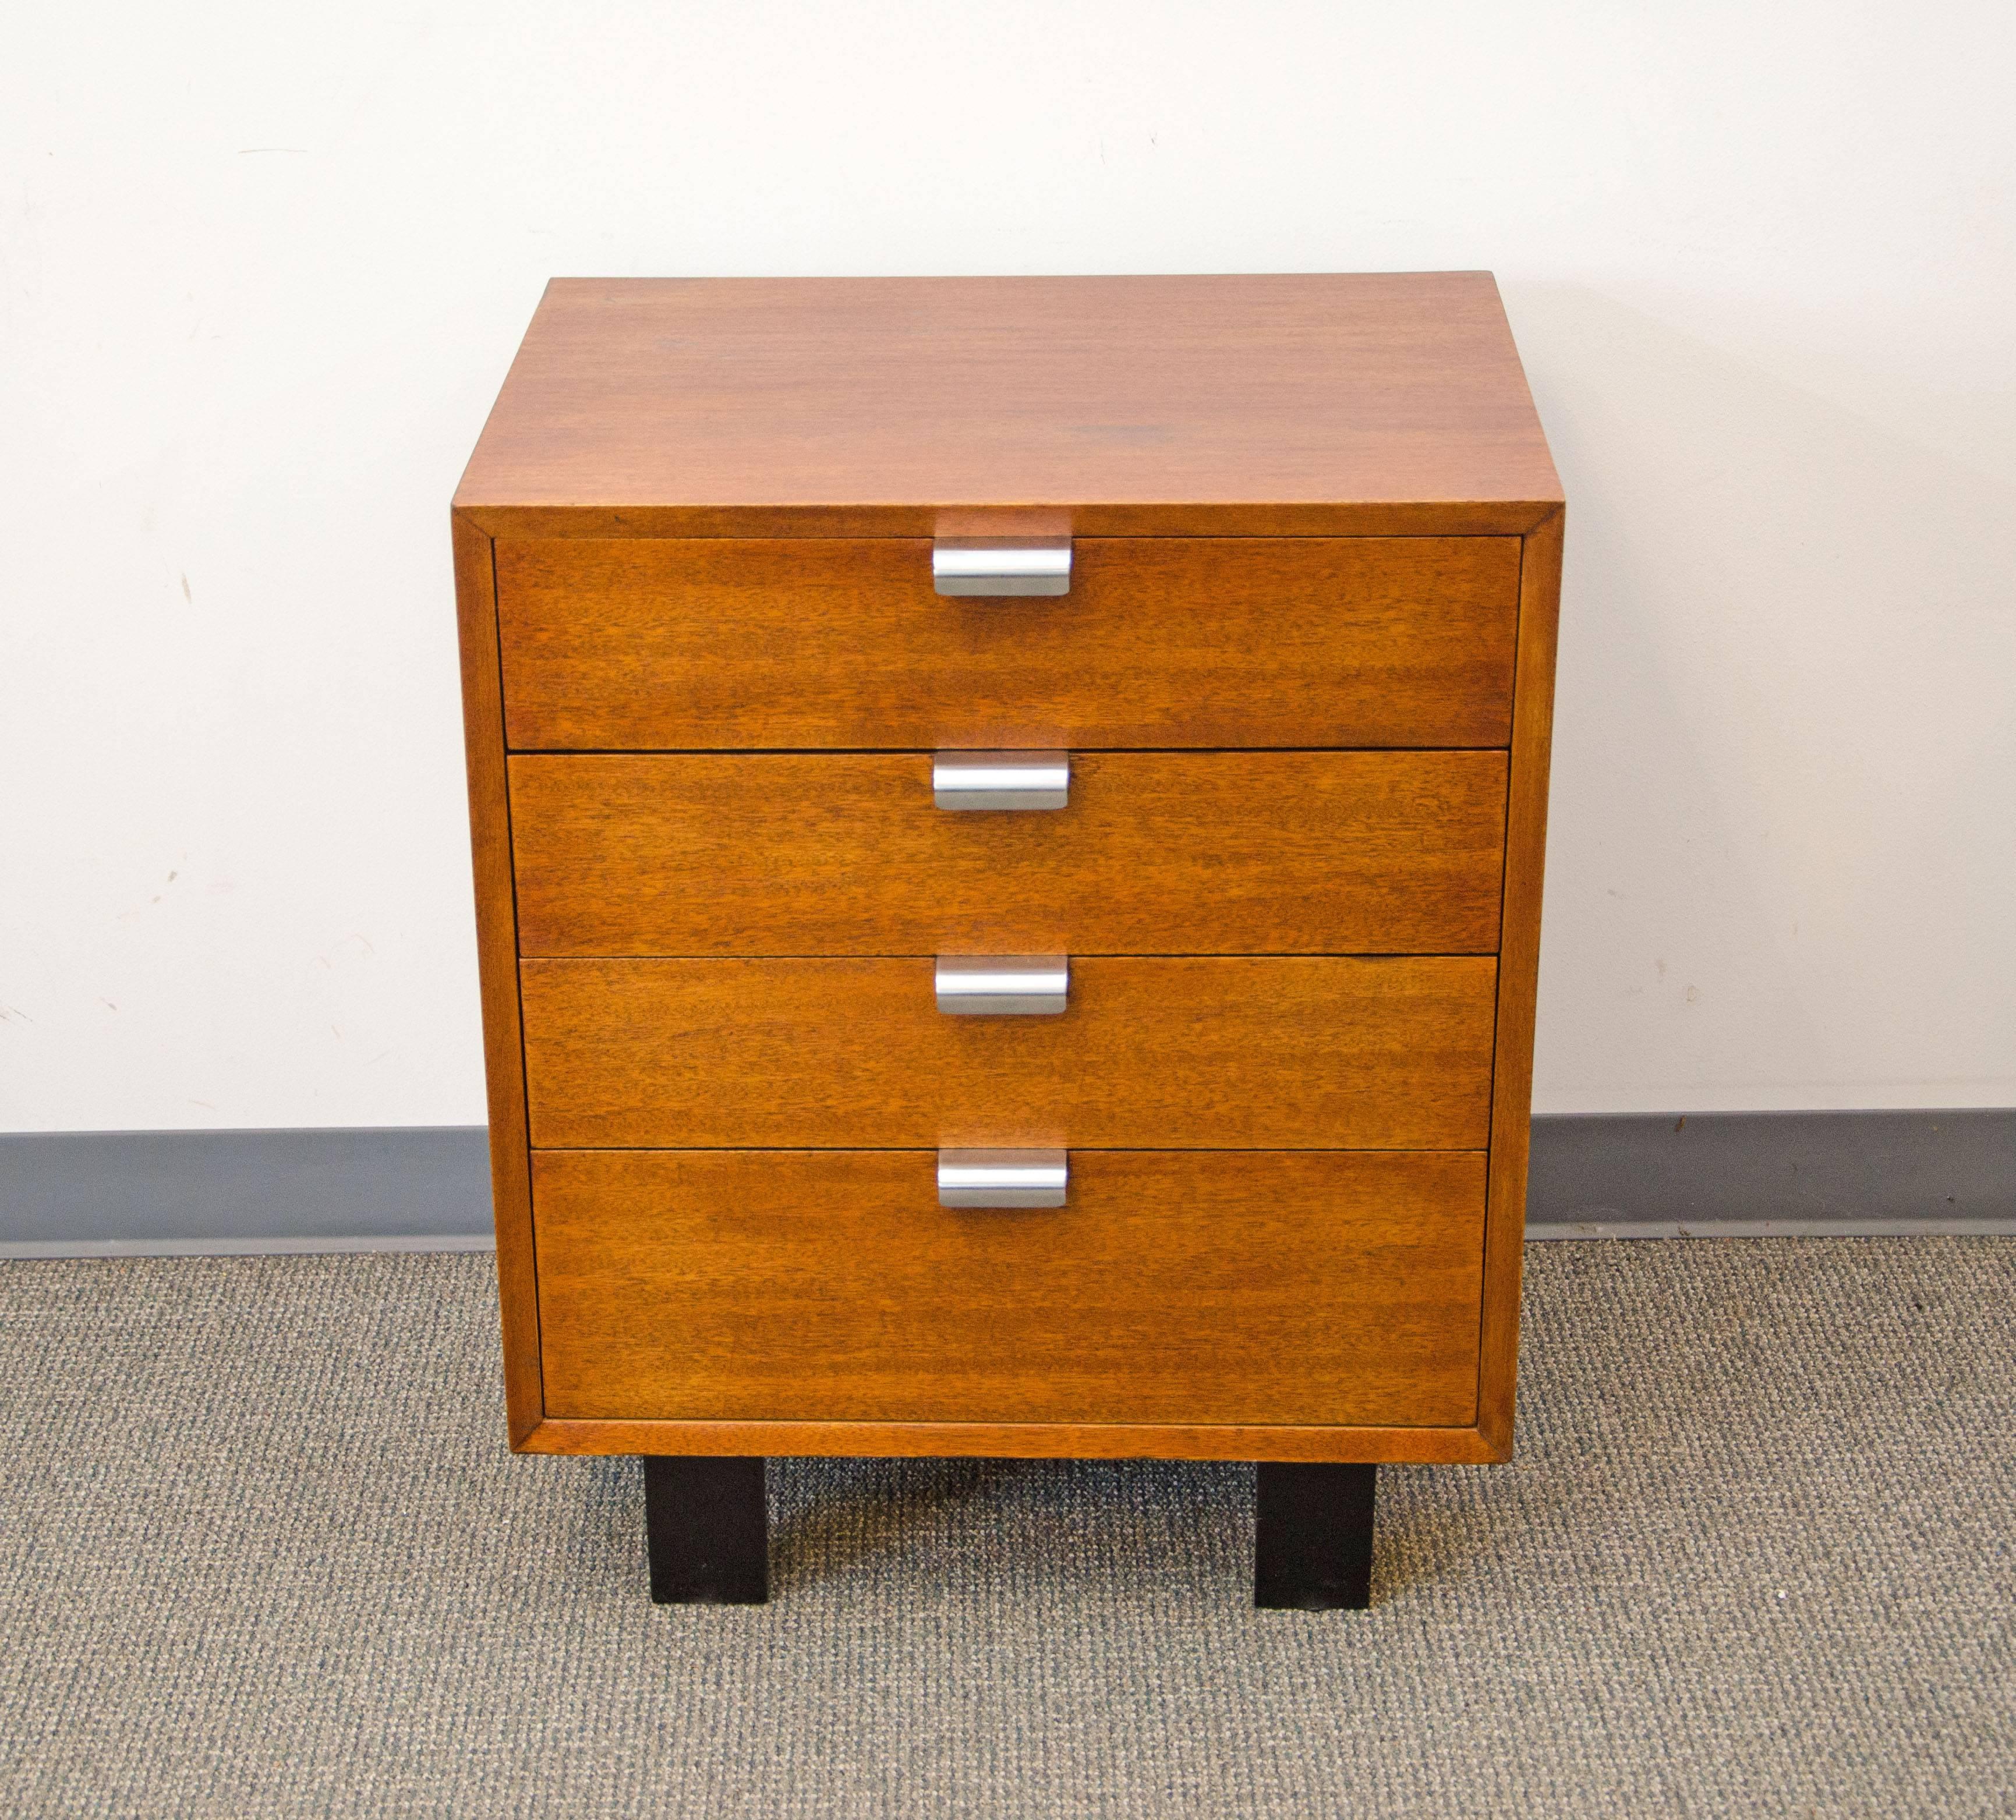 Versatile small cabinet with four drawers accented by the iconic 